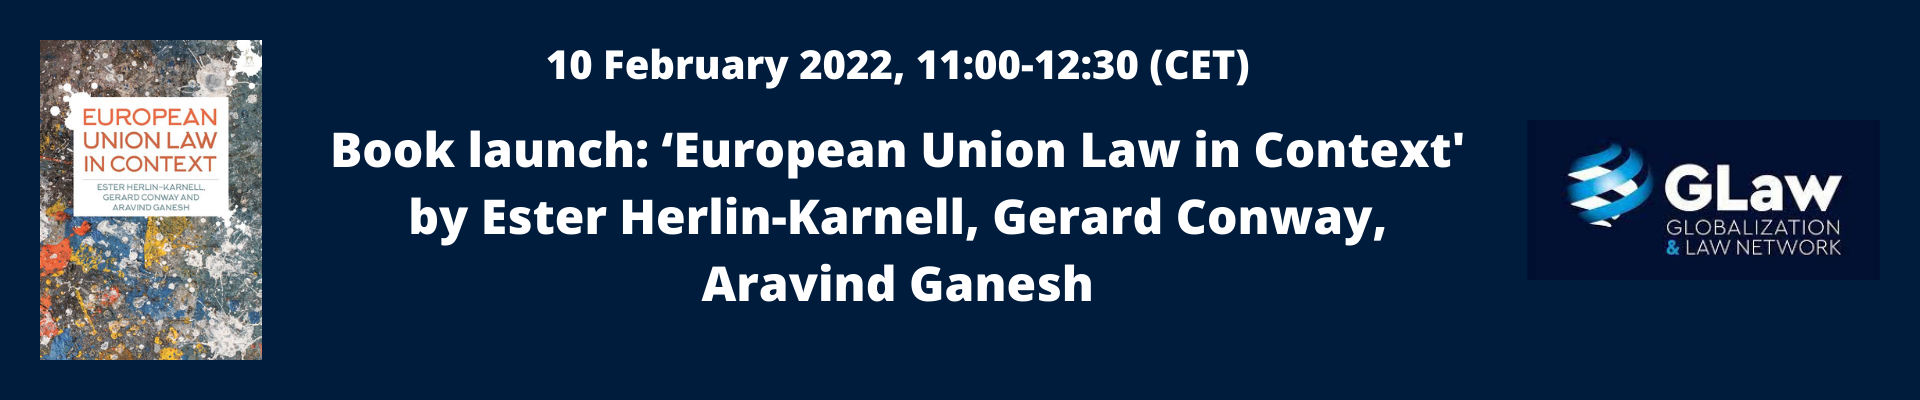 Book launch: European Union Law in Context